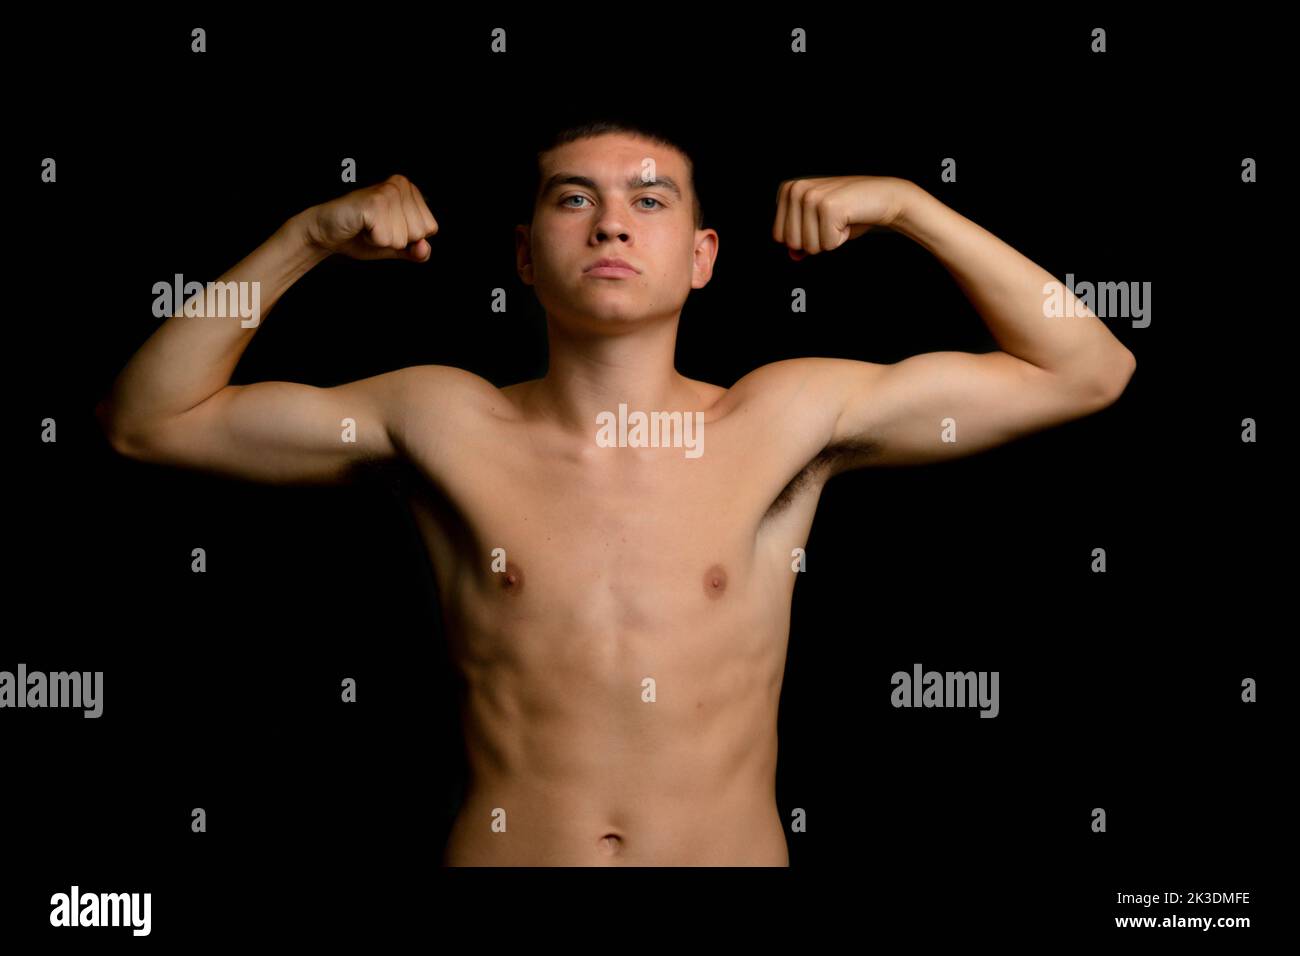 Shirtless 19 year old teenage boy flexing his arm muscles on a black background Stock Photo